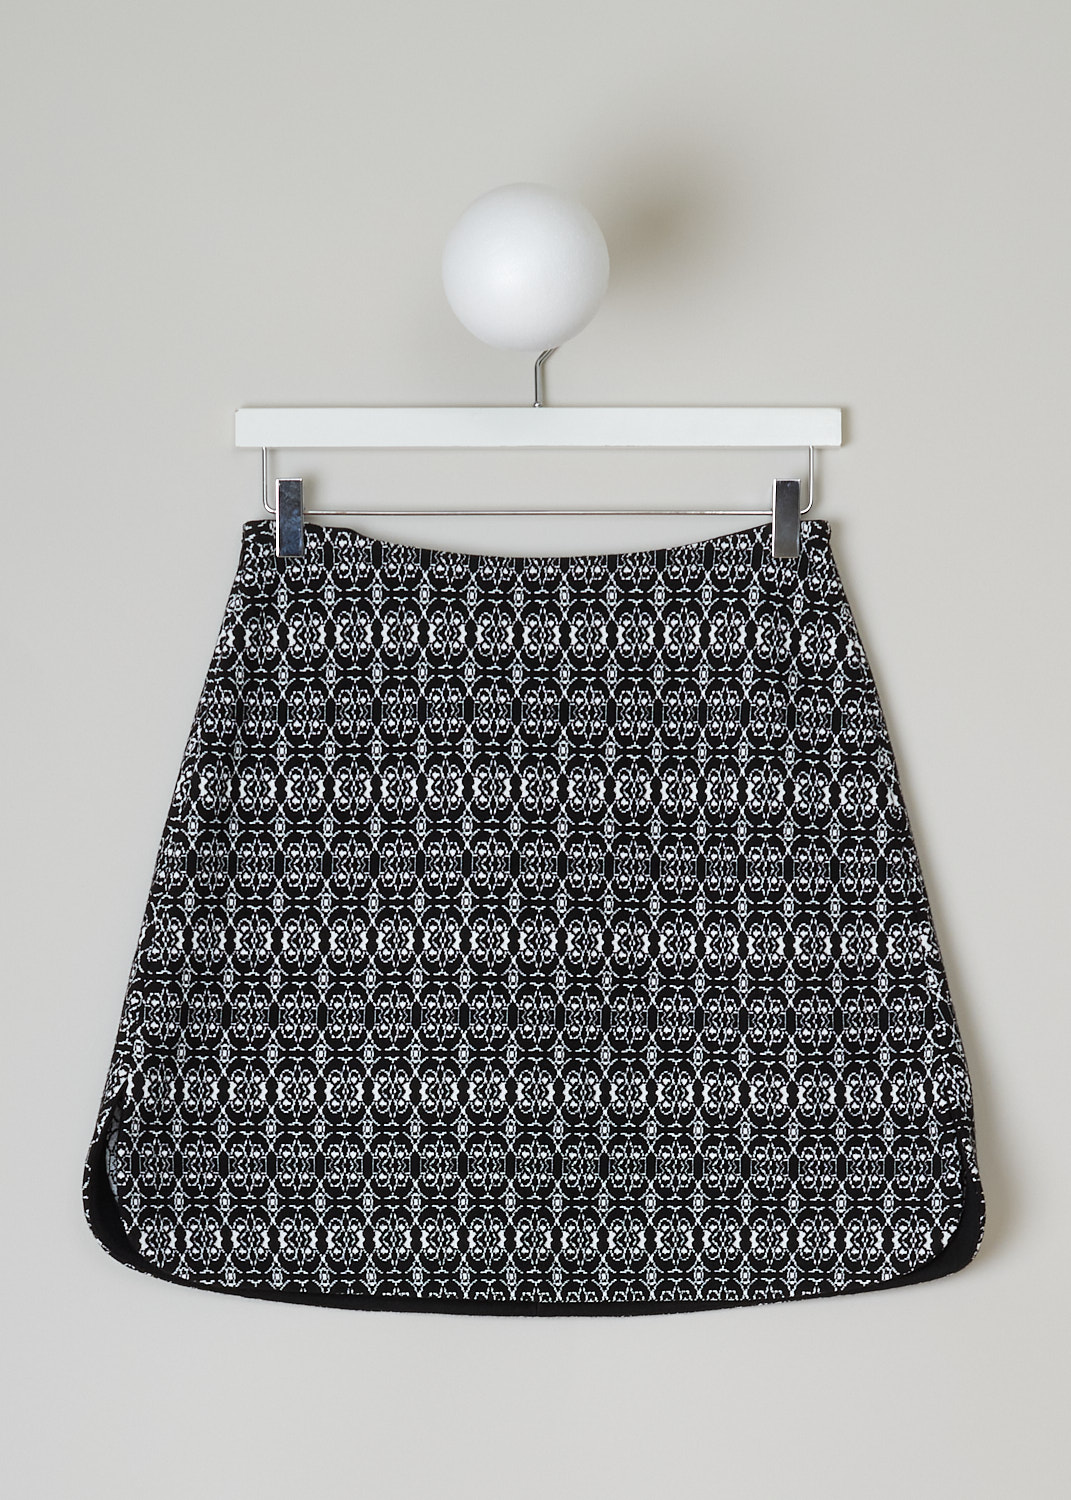 ALAÏA, BLACK AND WHITE PRINTED SKIRT, 8W9JD82CM408_JUPE_ALHAMBRA, Black, White, Print, Front, This black and white printed skirt is fully elasticated. A concealed side zip functions as the closure option. The skirt has a curved hemline with small slits.
